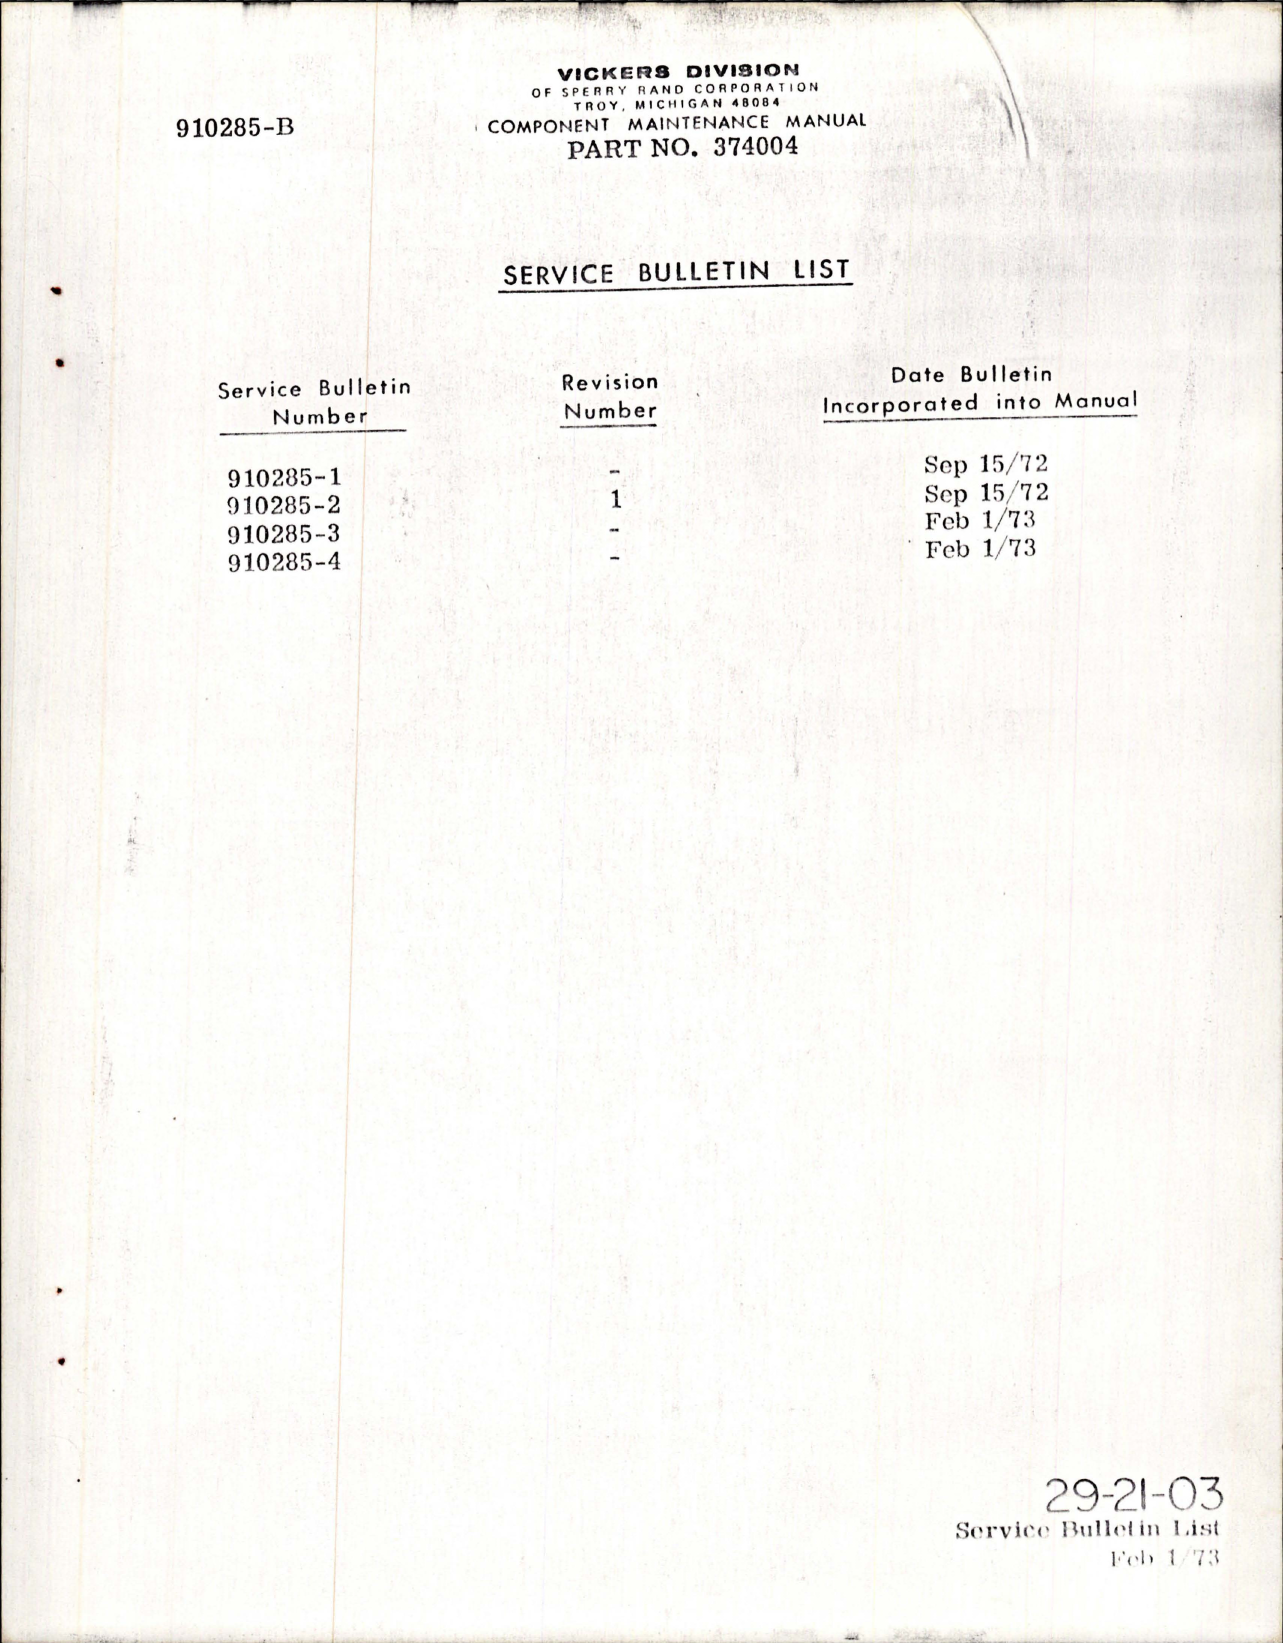 Sample page 5 from AirCorps Library document: Component Maintenance Manual for Electric Motor - Parts 374004 and 396362 